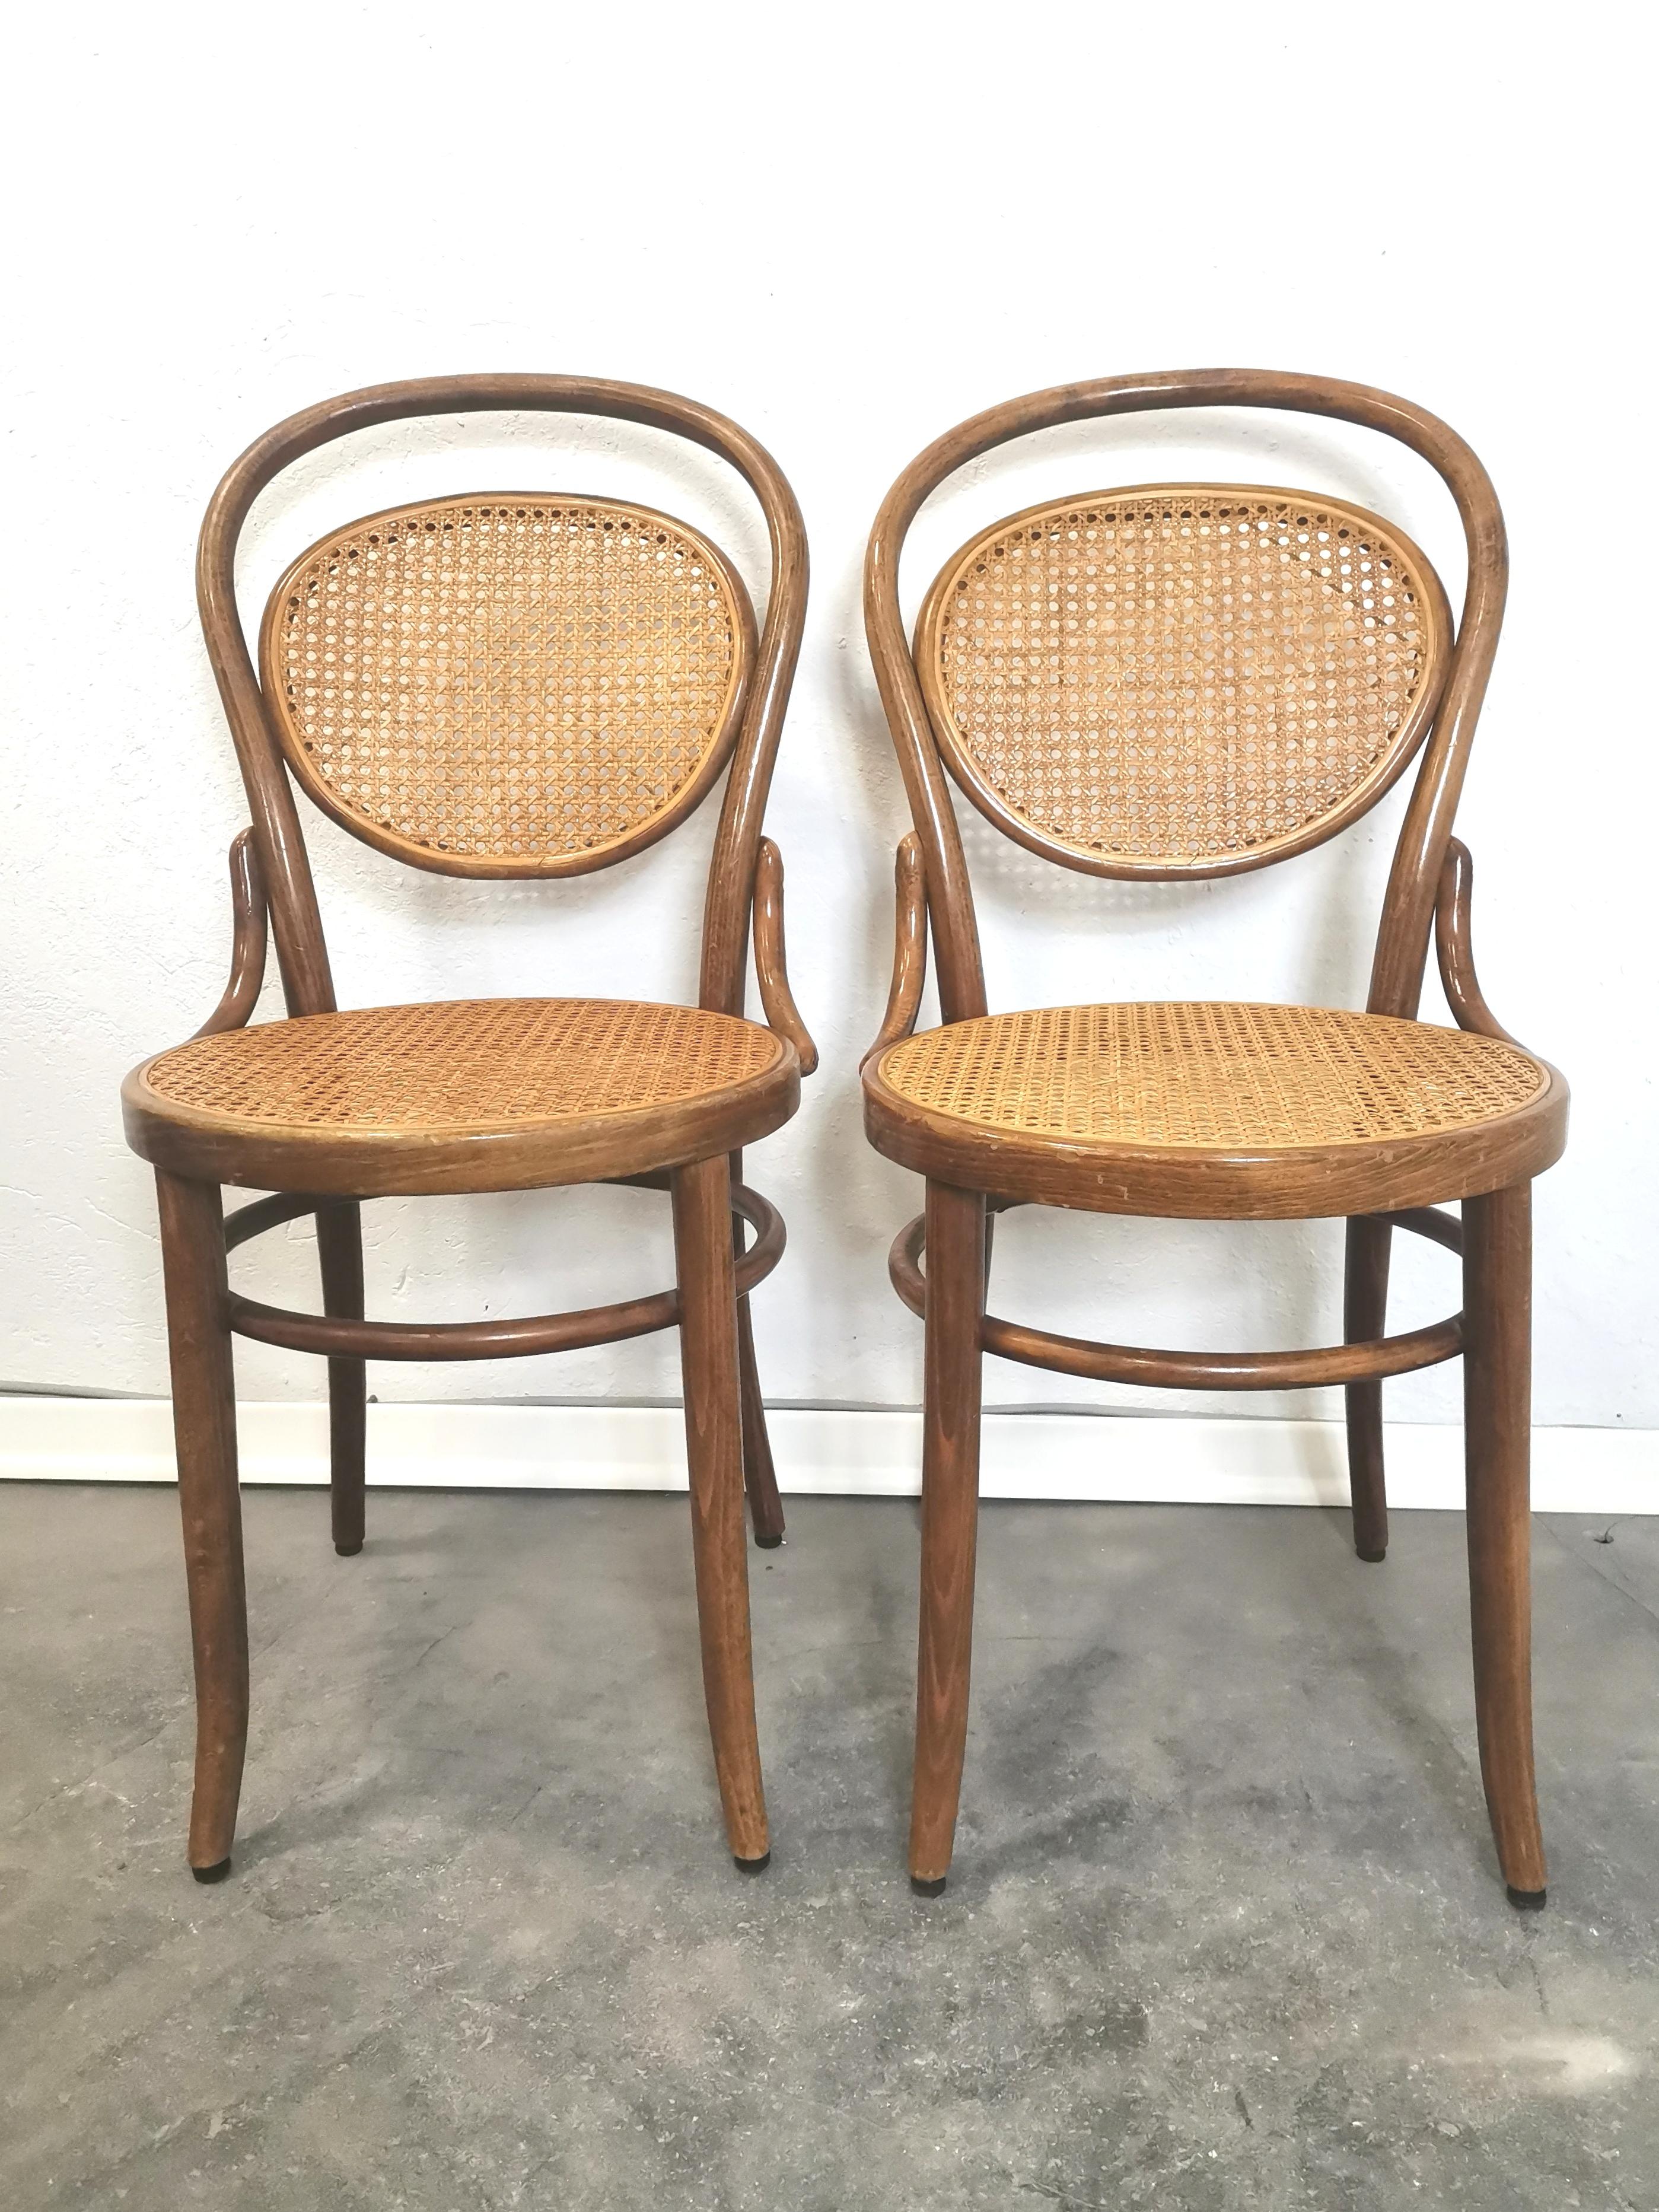 Mid-Century Modern Thonet Chair N. 215, 1960s, 1 of 4 For Sale